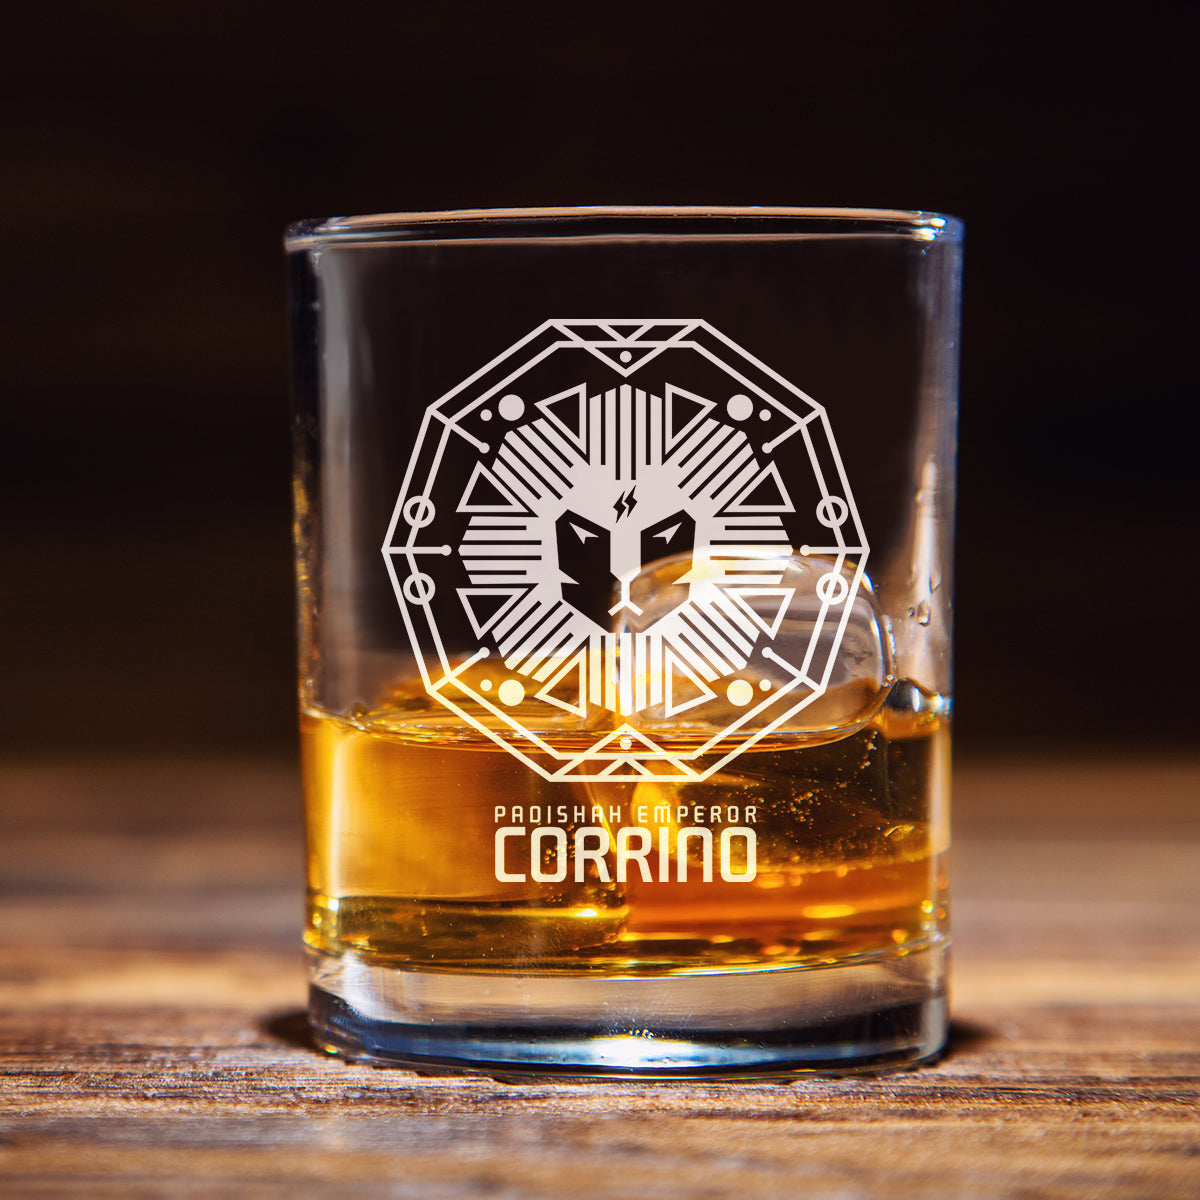 The Houses of Dune Whiskey Glass